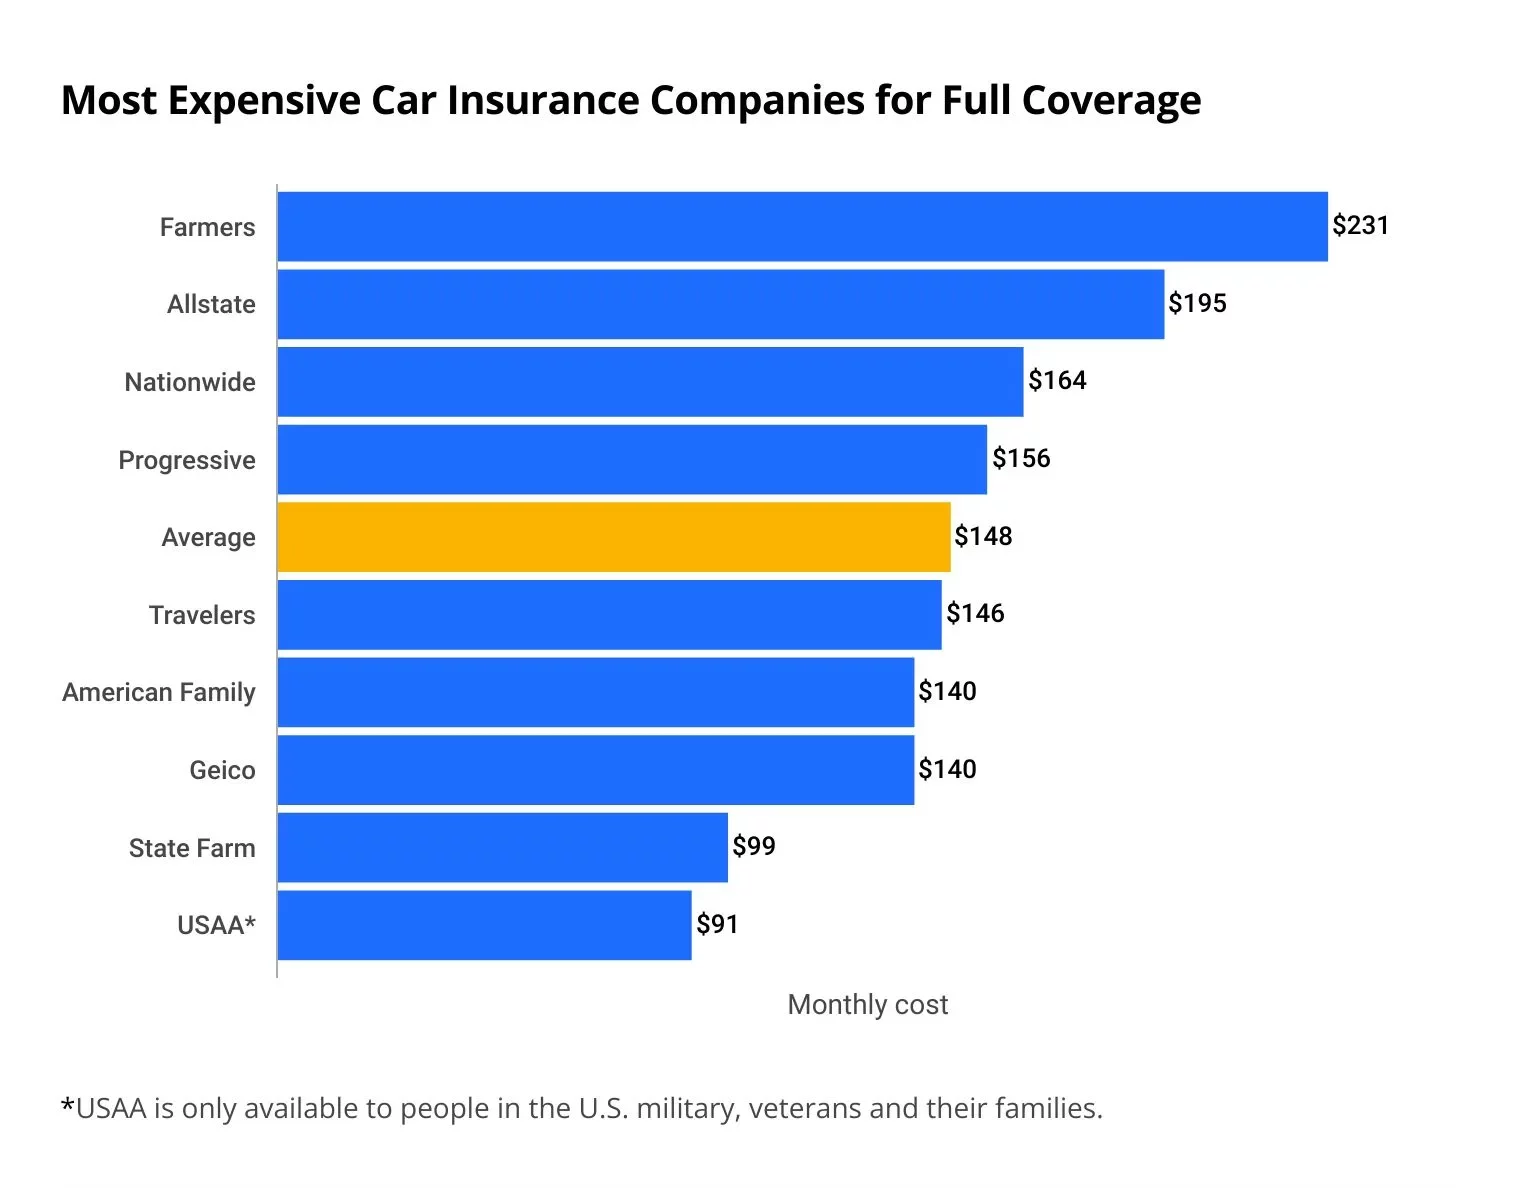 Most expensive car insurance companies